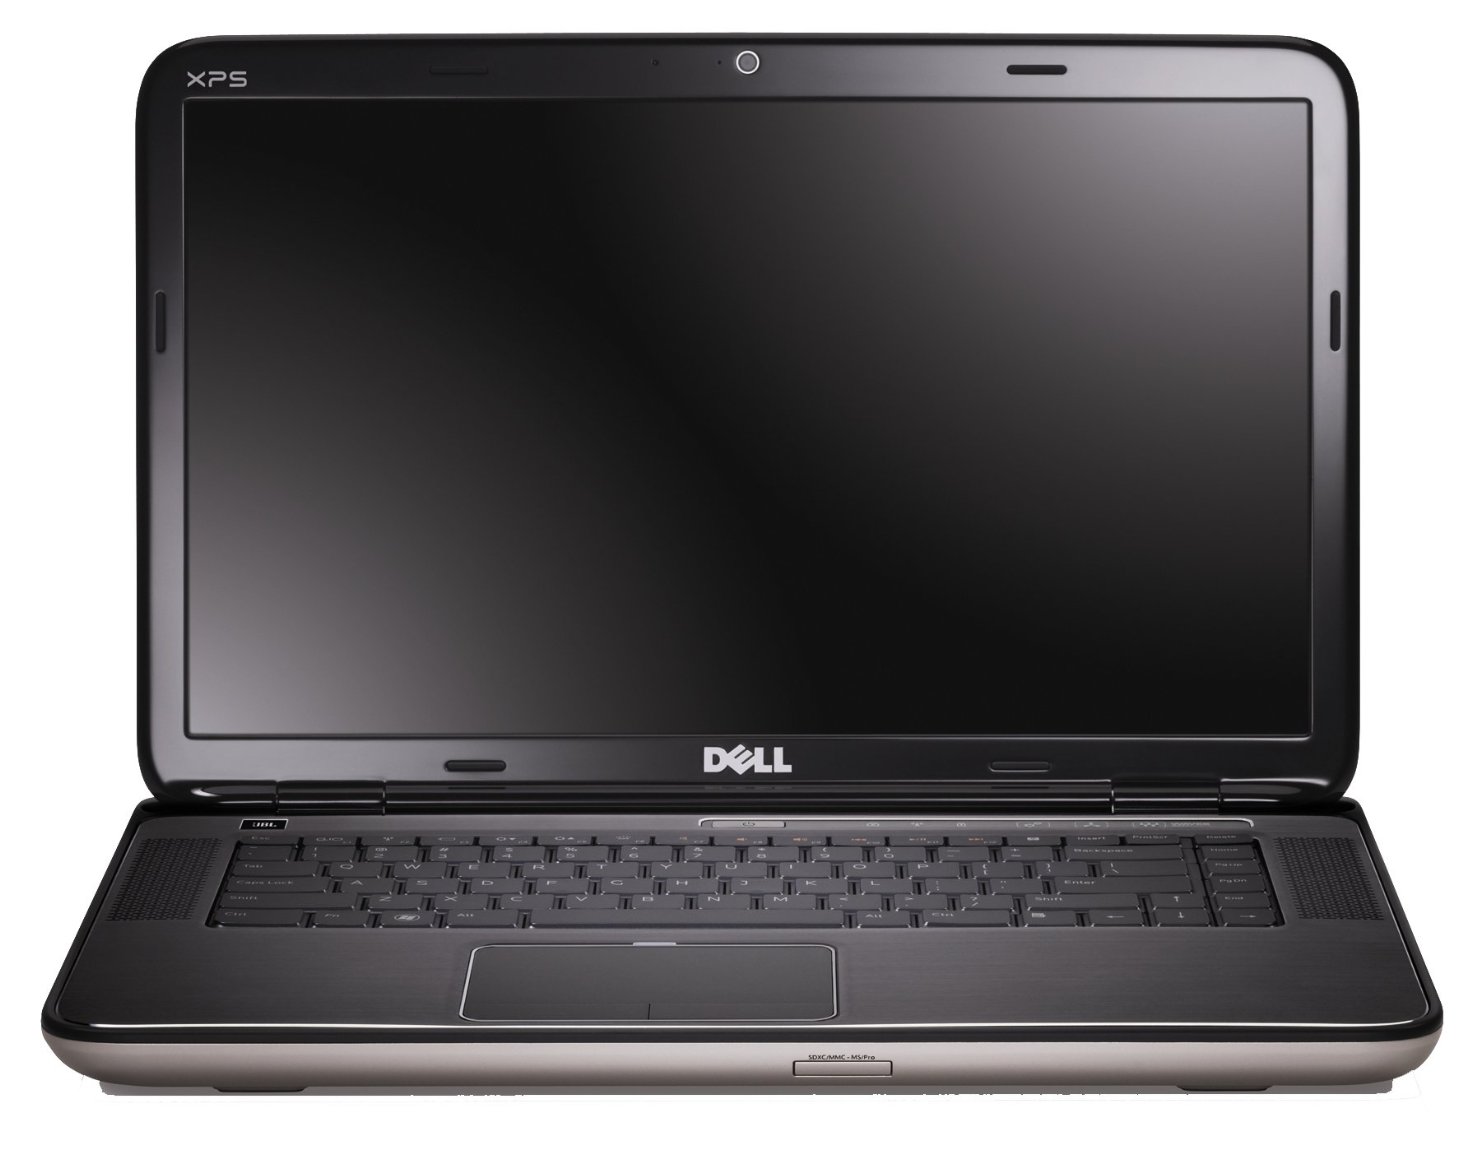   Dell XPS 15 (9570-7028)  1